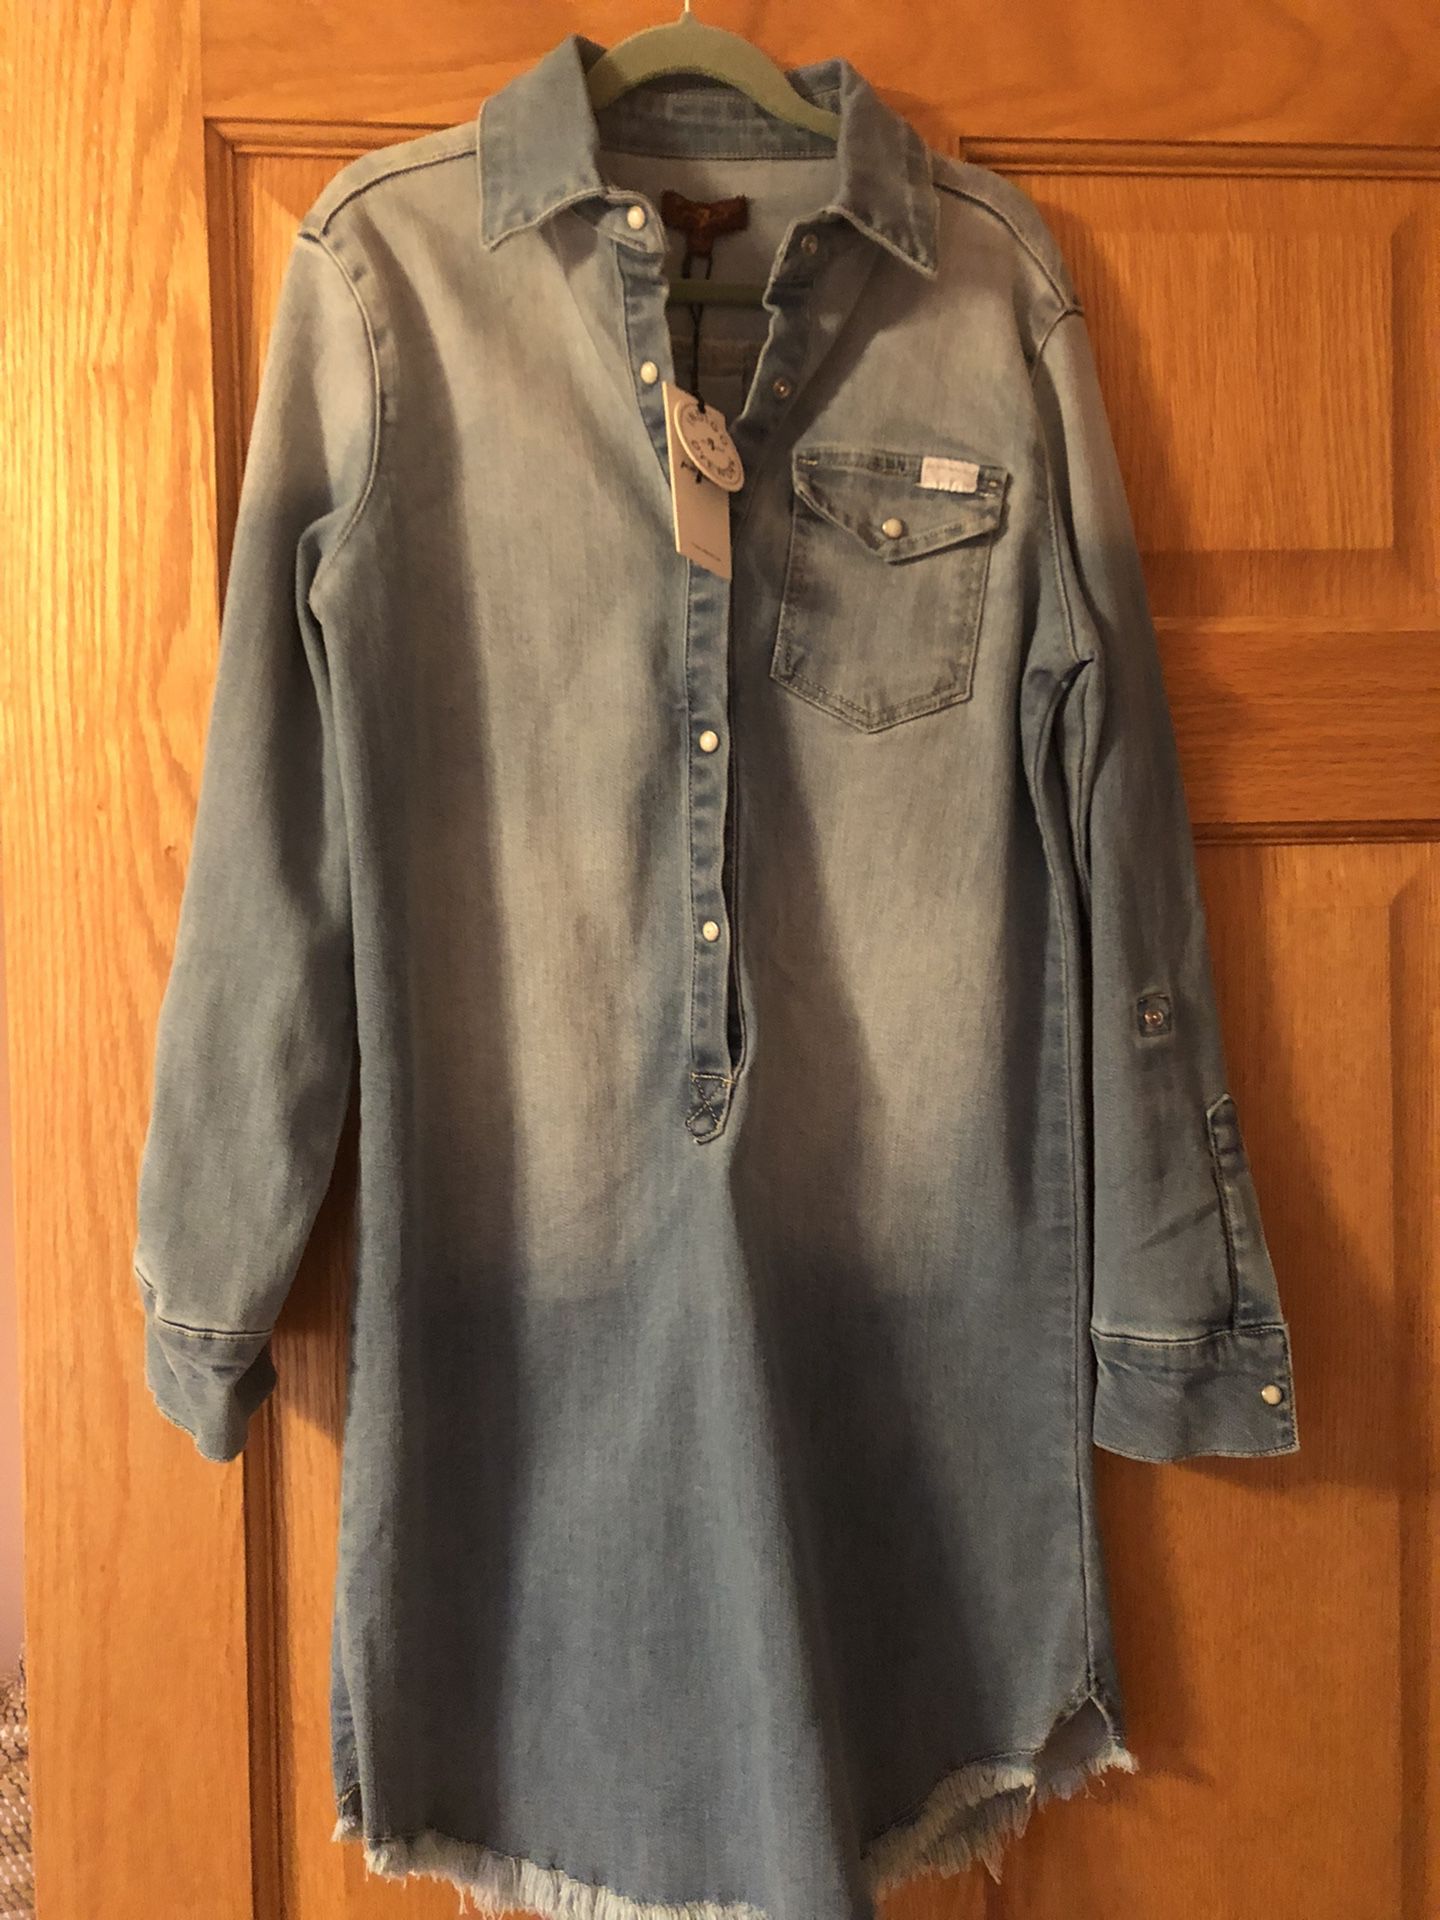 Denim Dress By 7 For All Mankind